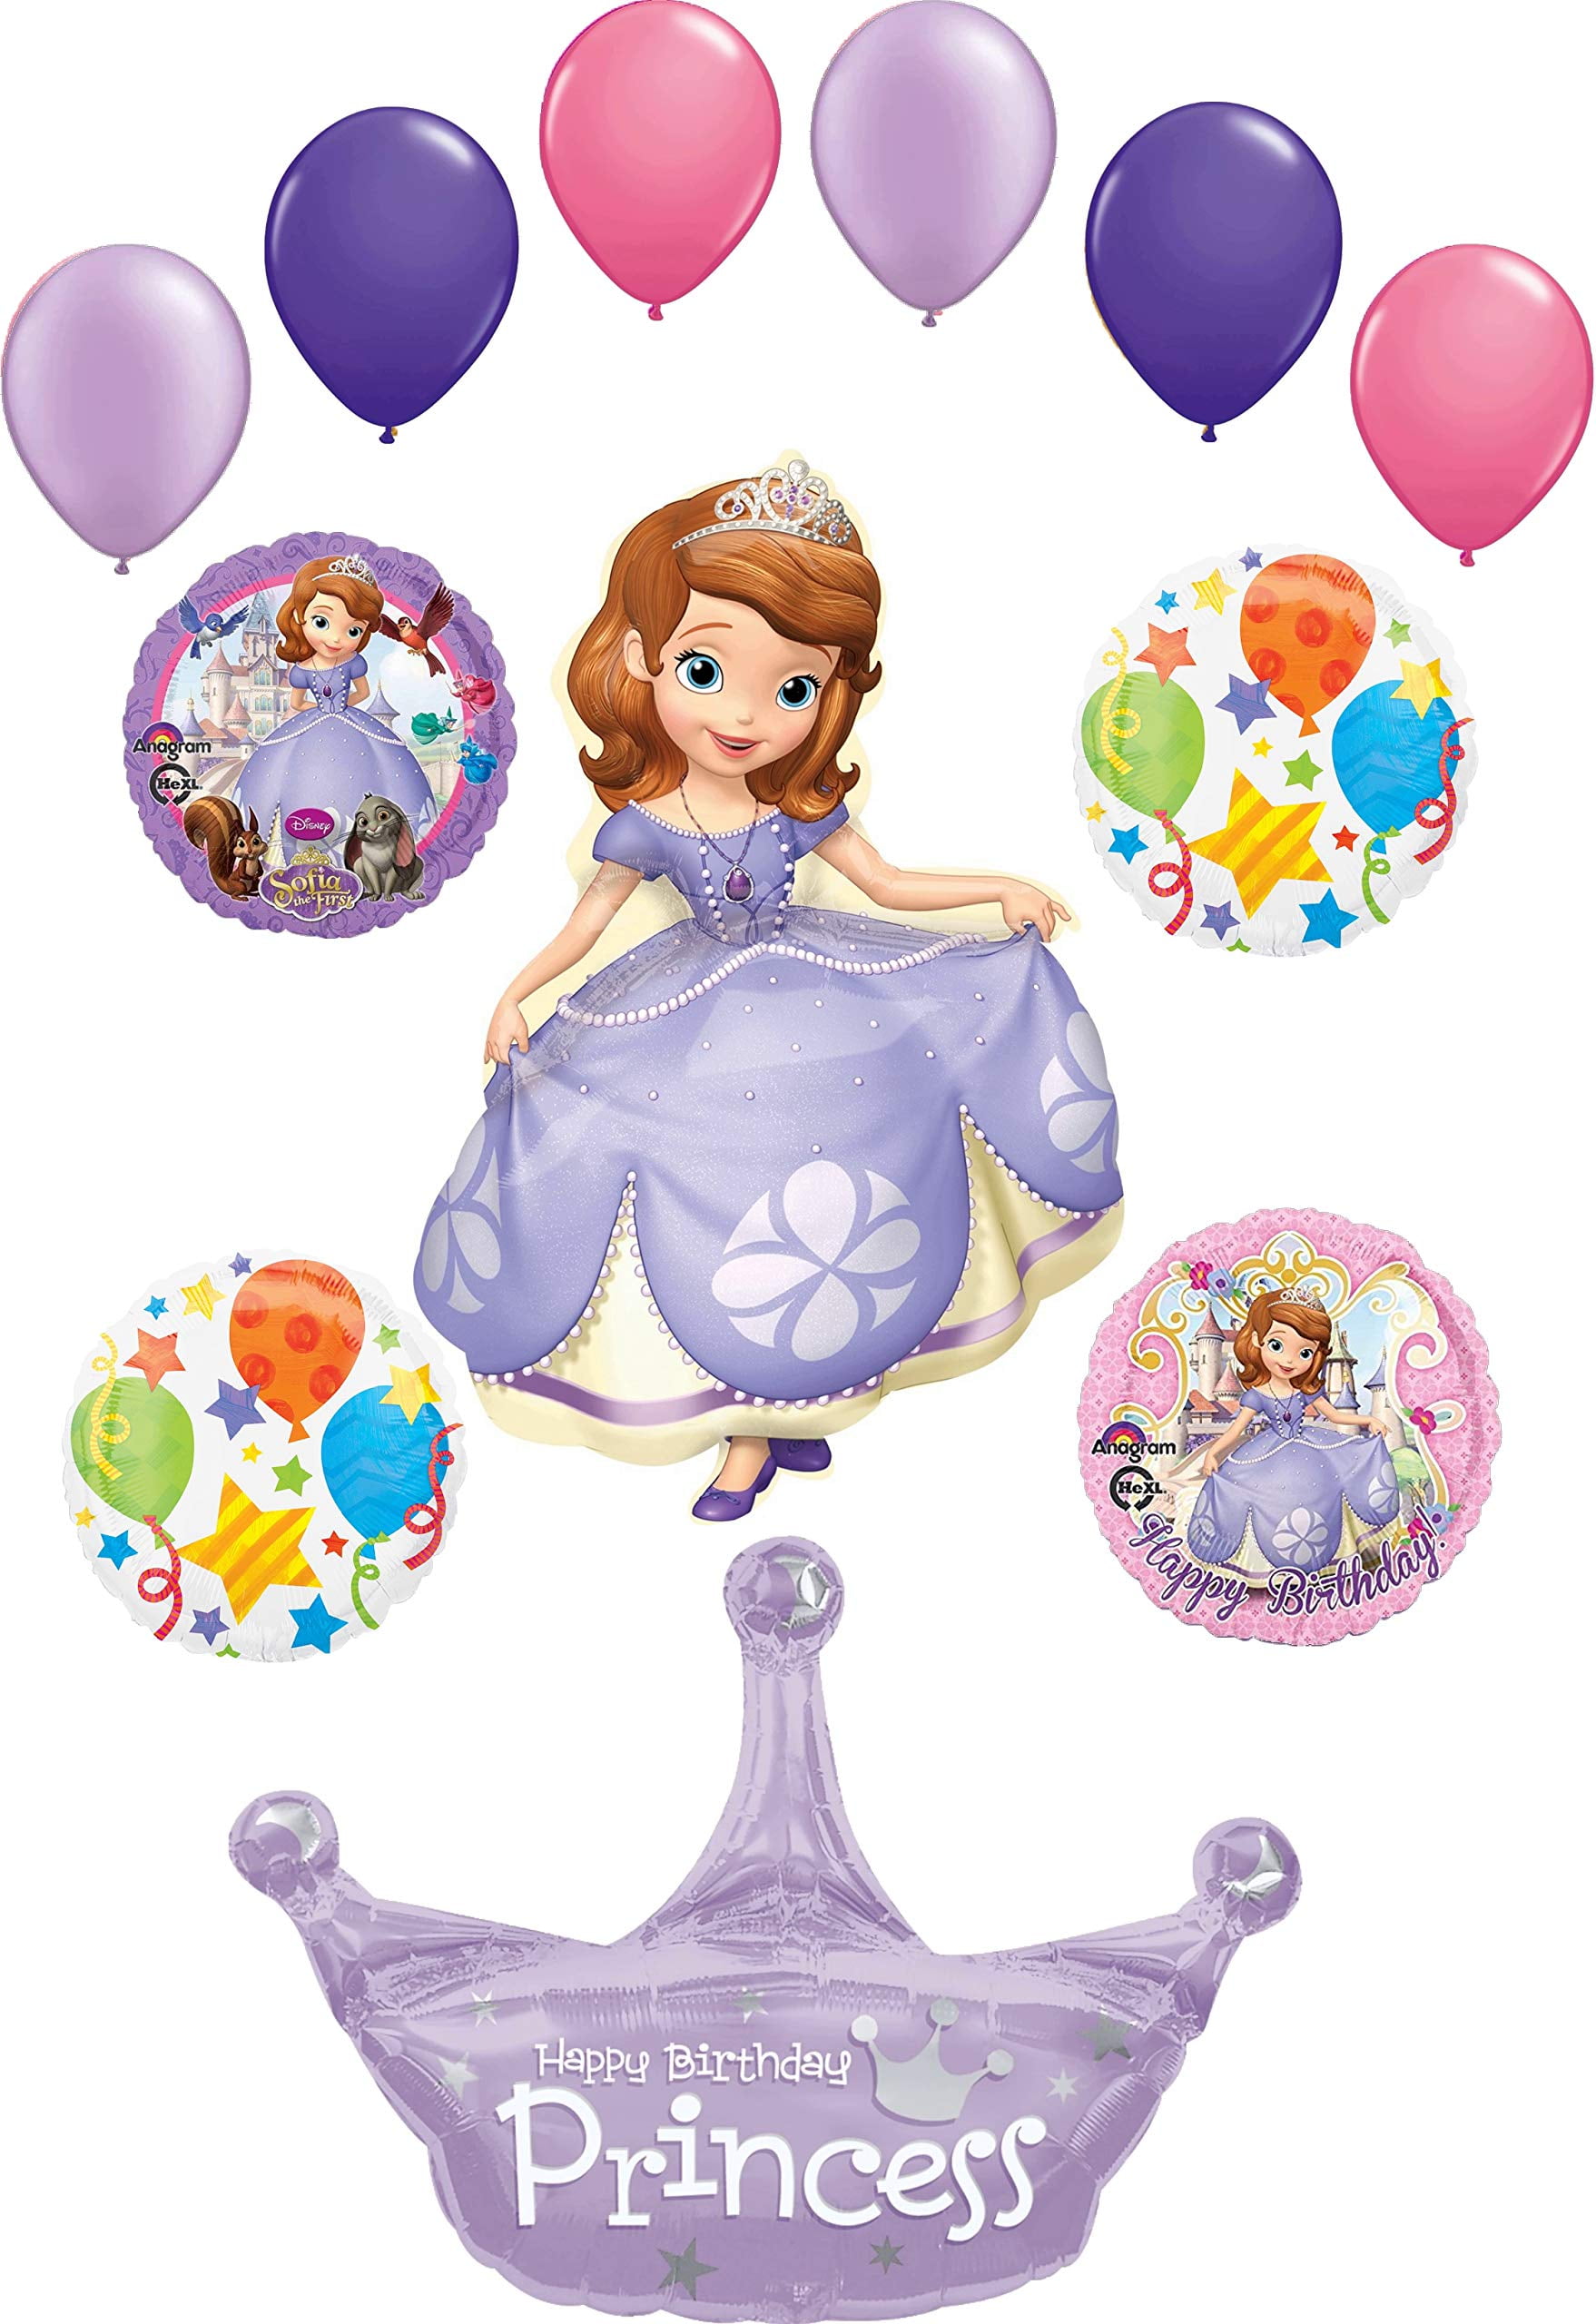 PRINCESS SOFIA THE FIRST HAPPY BIRTHDAY PARTY BALLOONS Decorations Supplies NEW! 